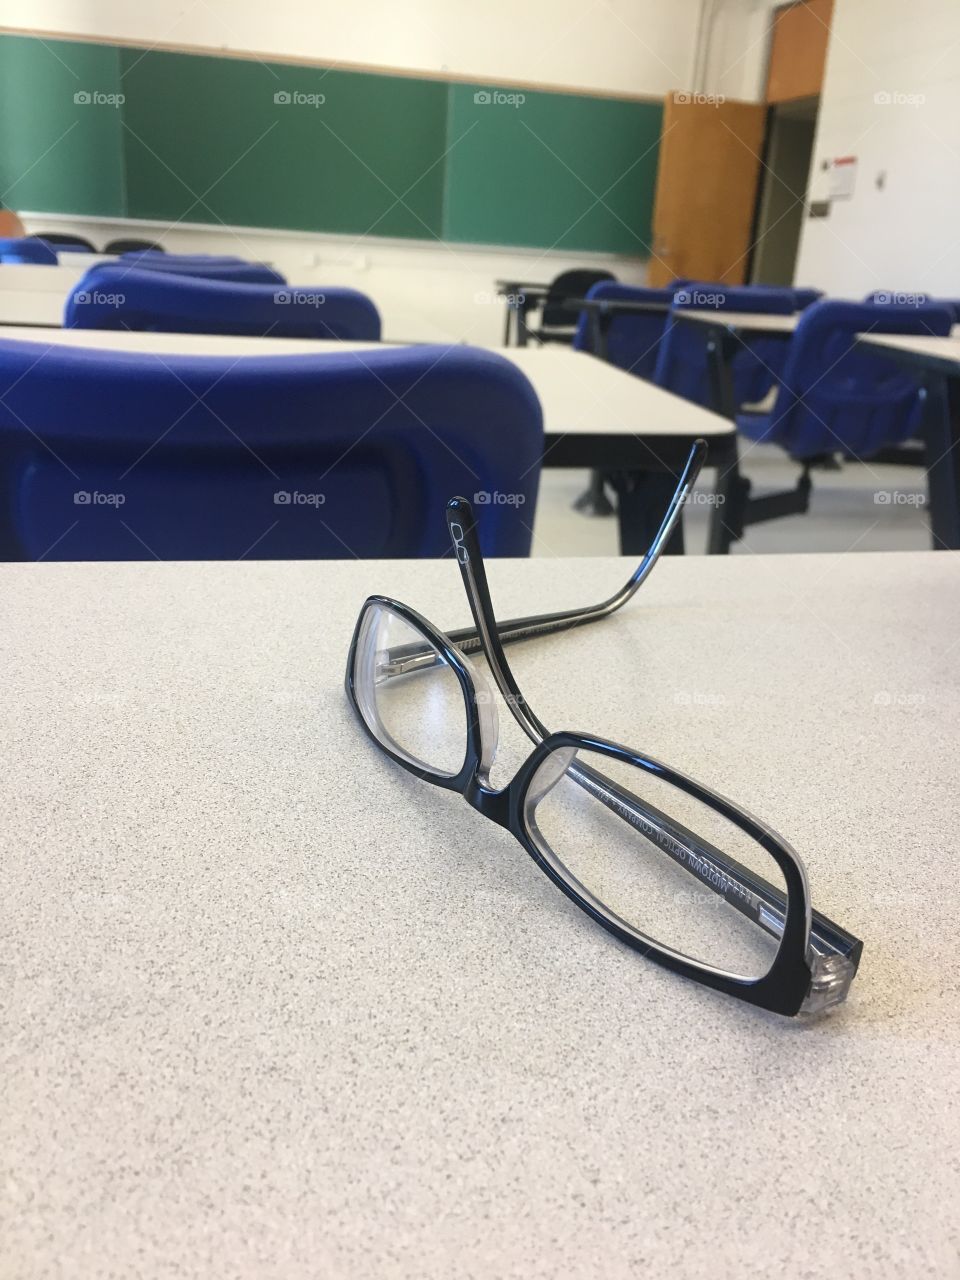 Glasses on a desk in an empty classroom